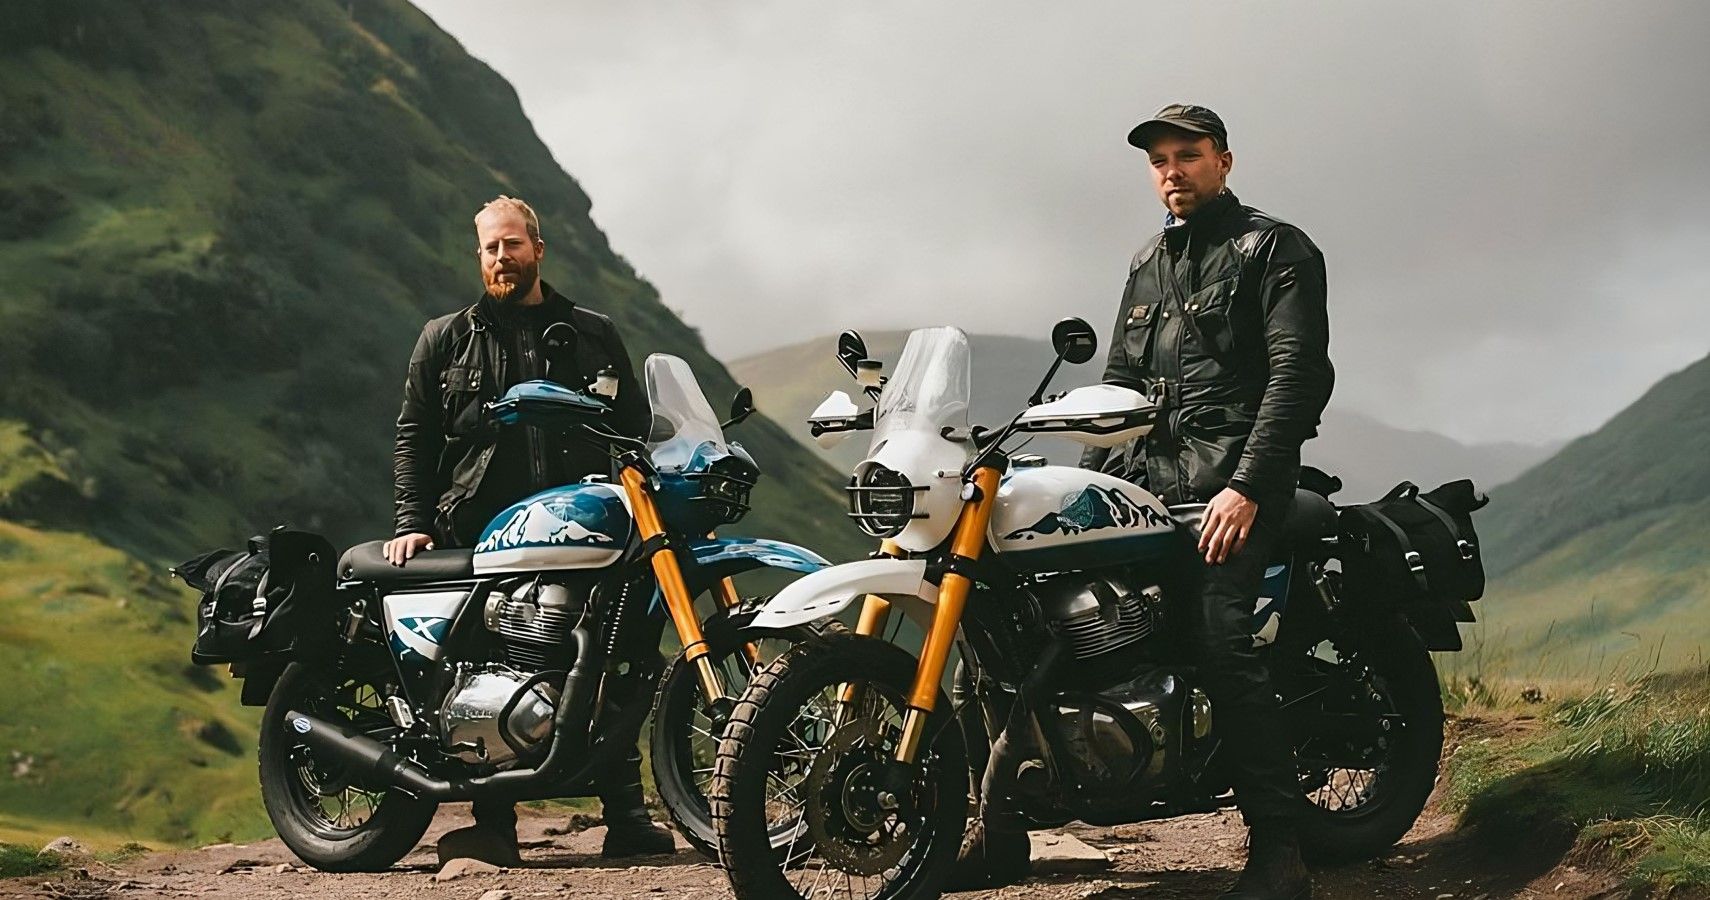 Custom Royal Enfield INT650-Based Scramblers Are Bikerbnb's Personal Runabouts